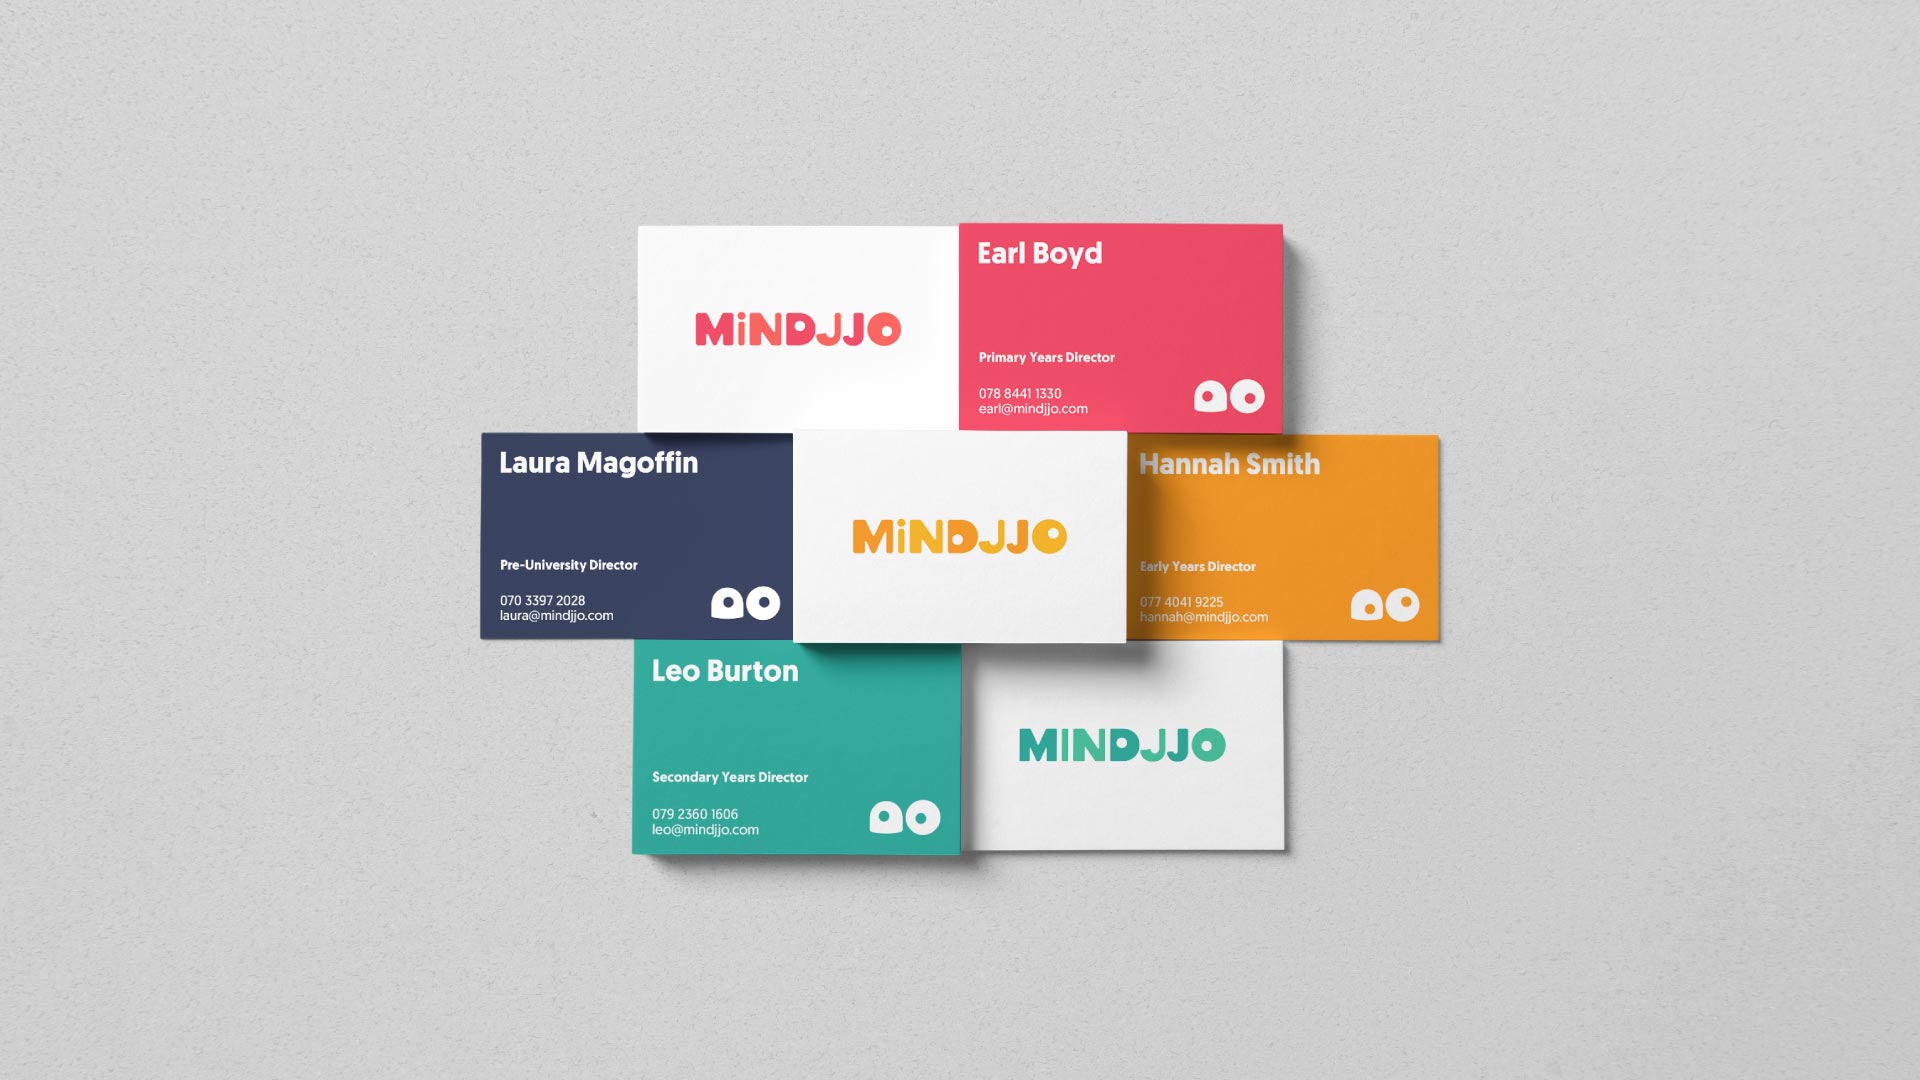 Colourful Mindjjo branded business cards using the new colour palette.